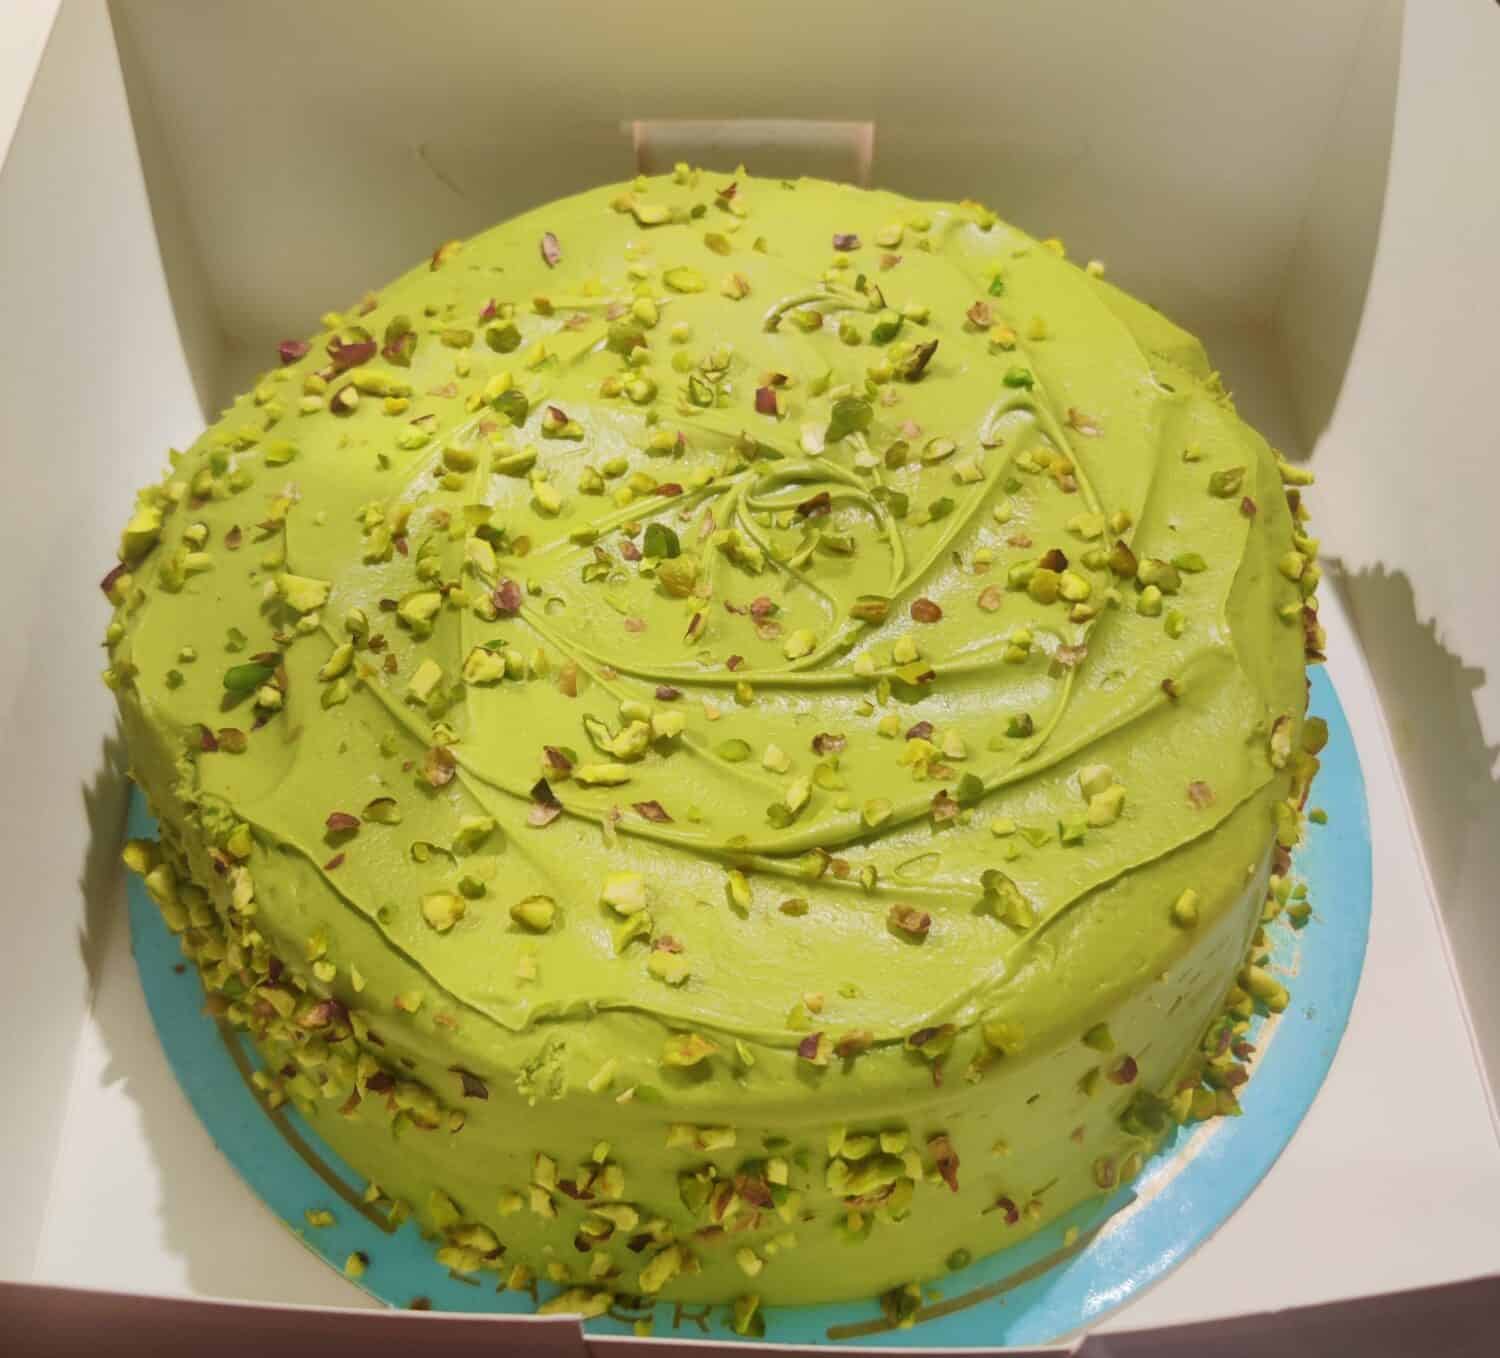 Delicious fresh pistachio cake by Layers.